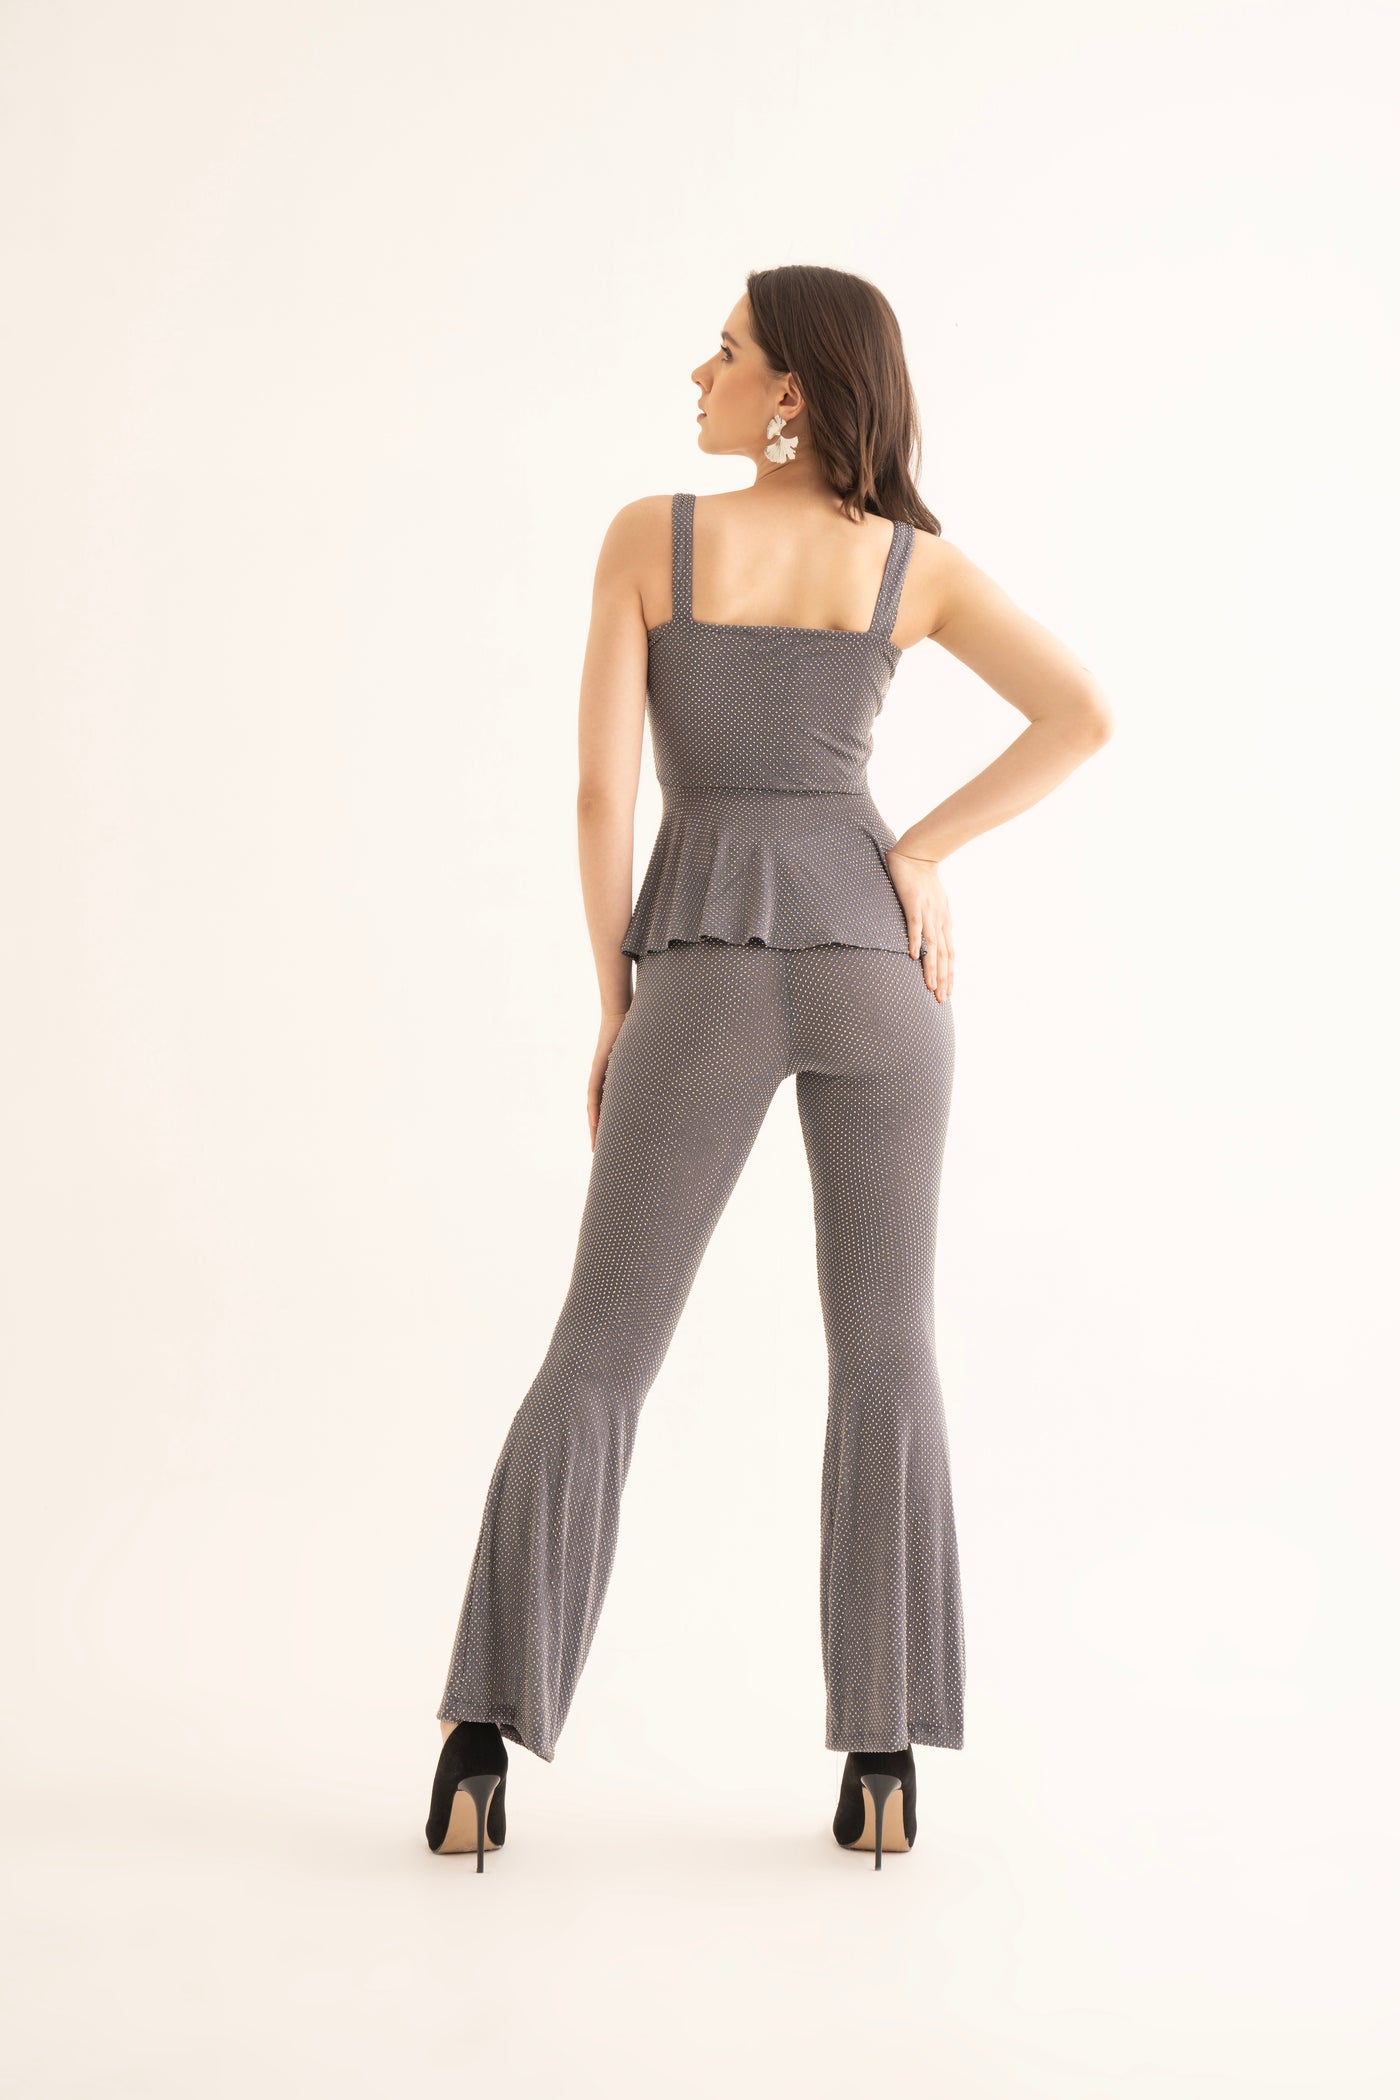 Grey Rhinestone Peplum Top and Bell Bottoms Co-ord